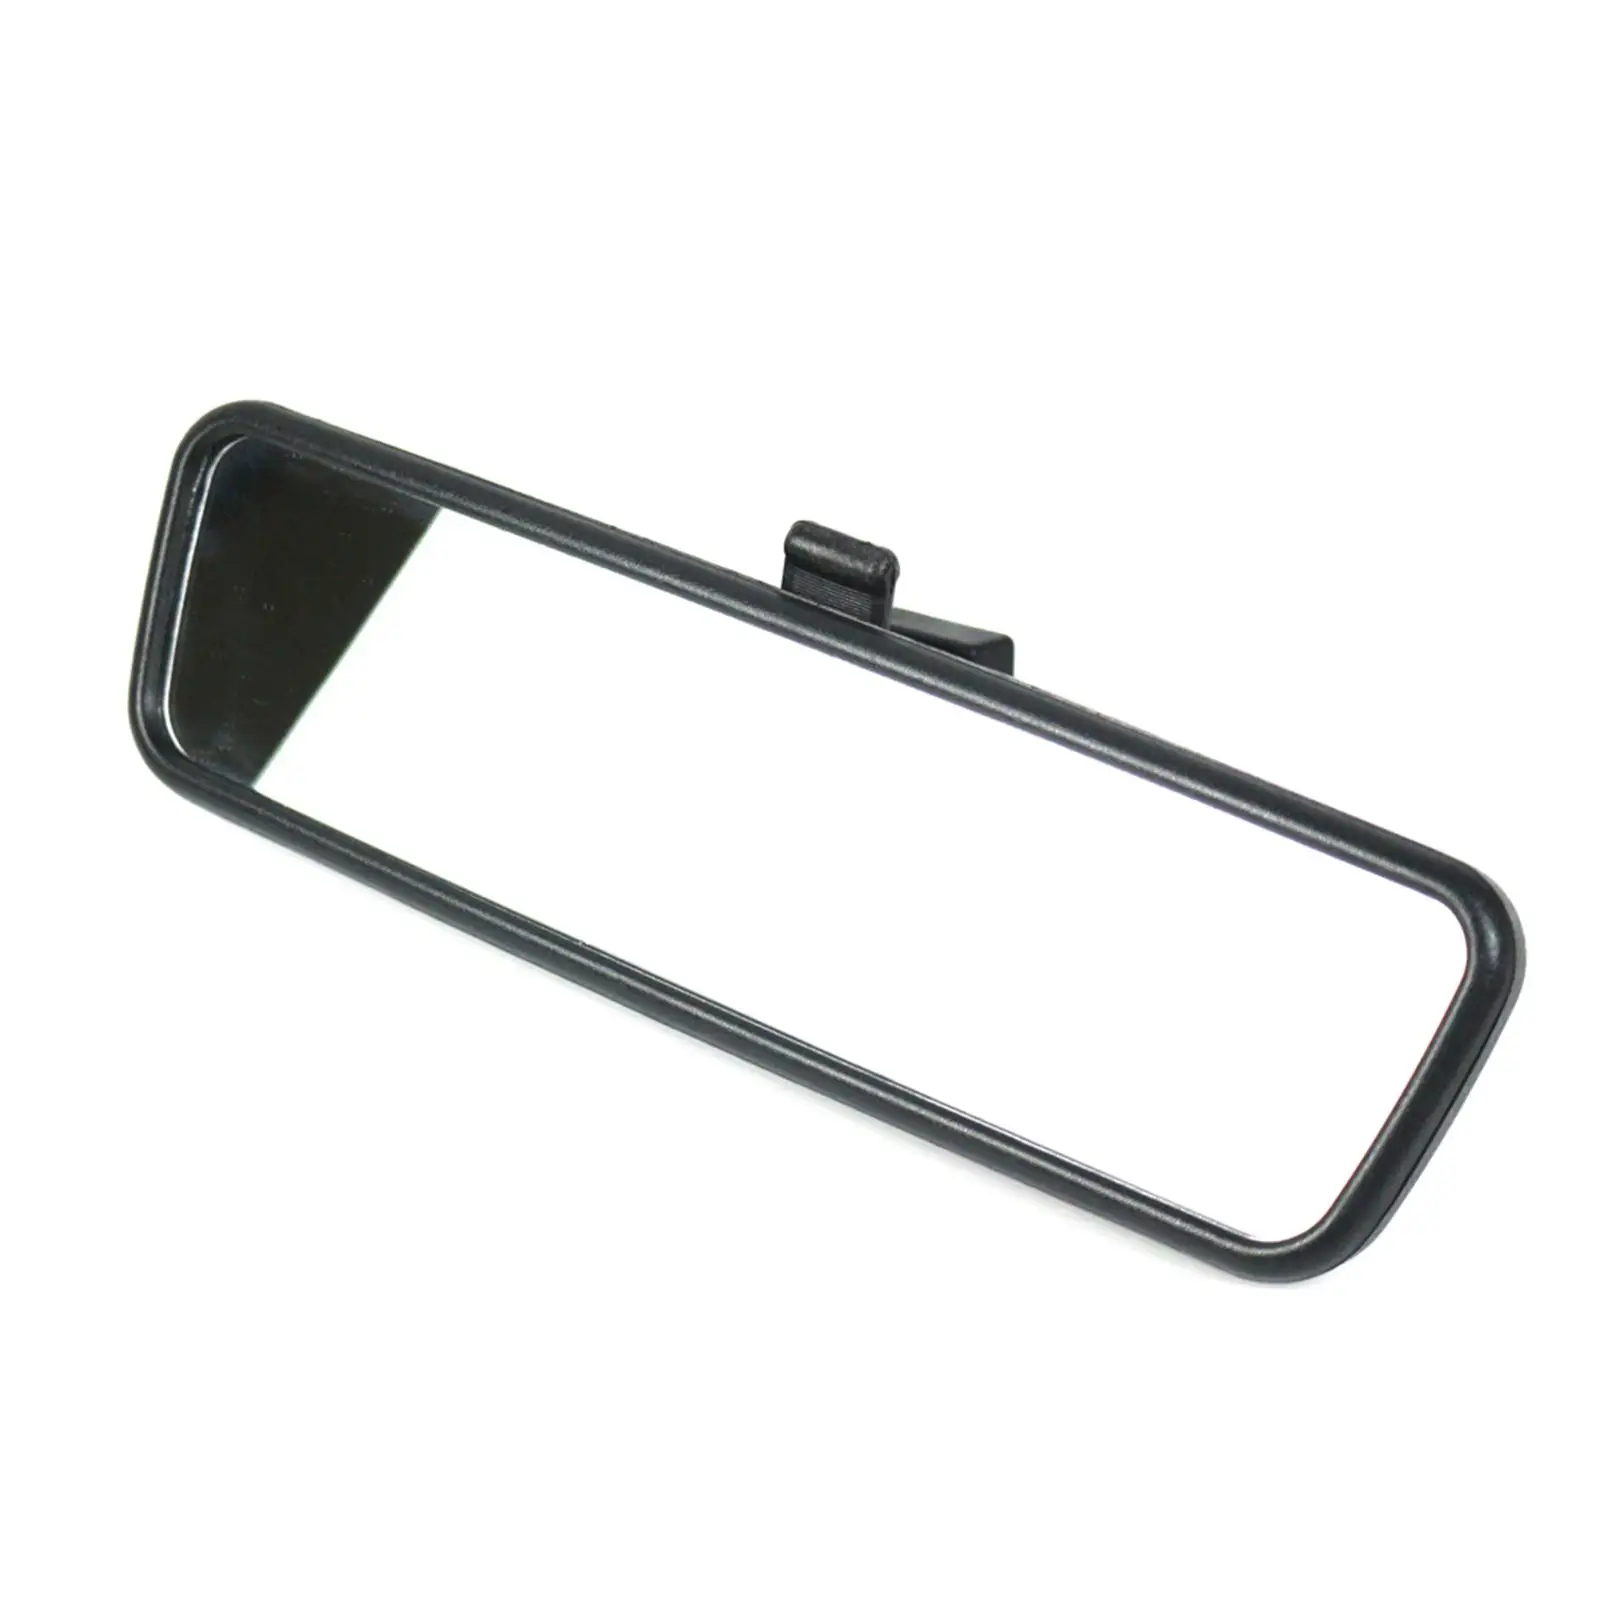 Interior Rear View Mirror 814842 Rearview Mirror for Citroen C1 Accessory Replaces Spare Parts High Performance